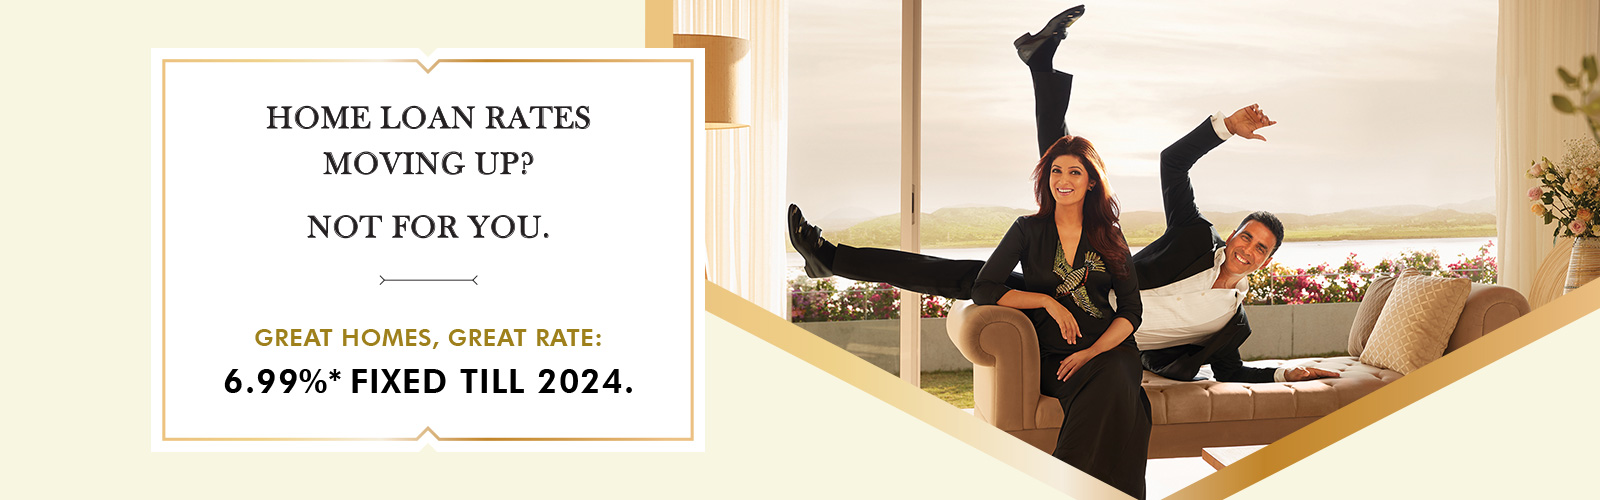 Lodha Homeloan - Buy Lodha Homes at Lowest Interest Rate